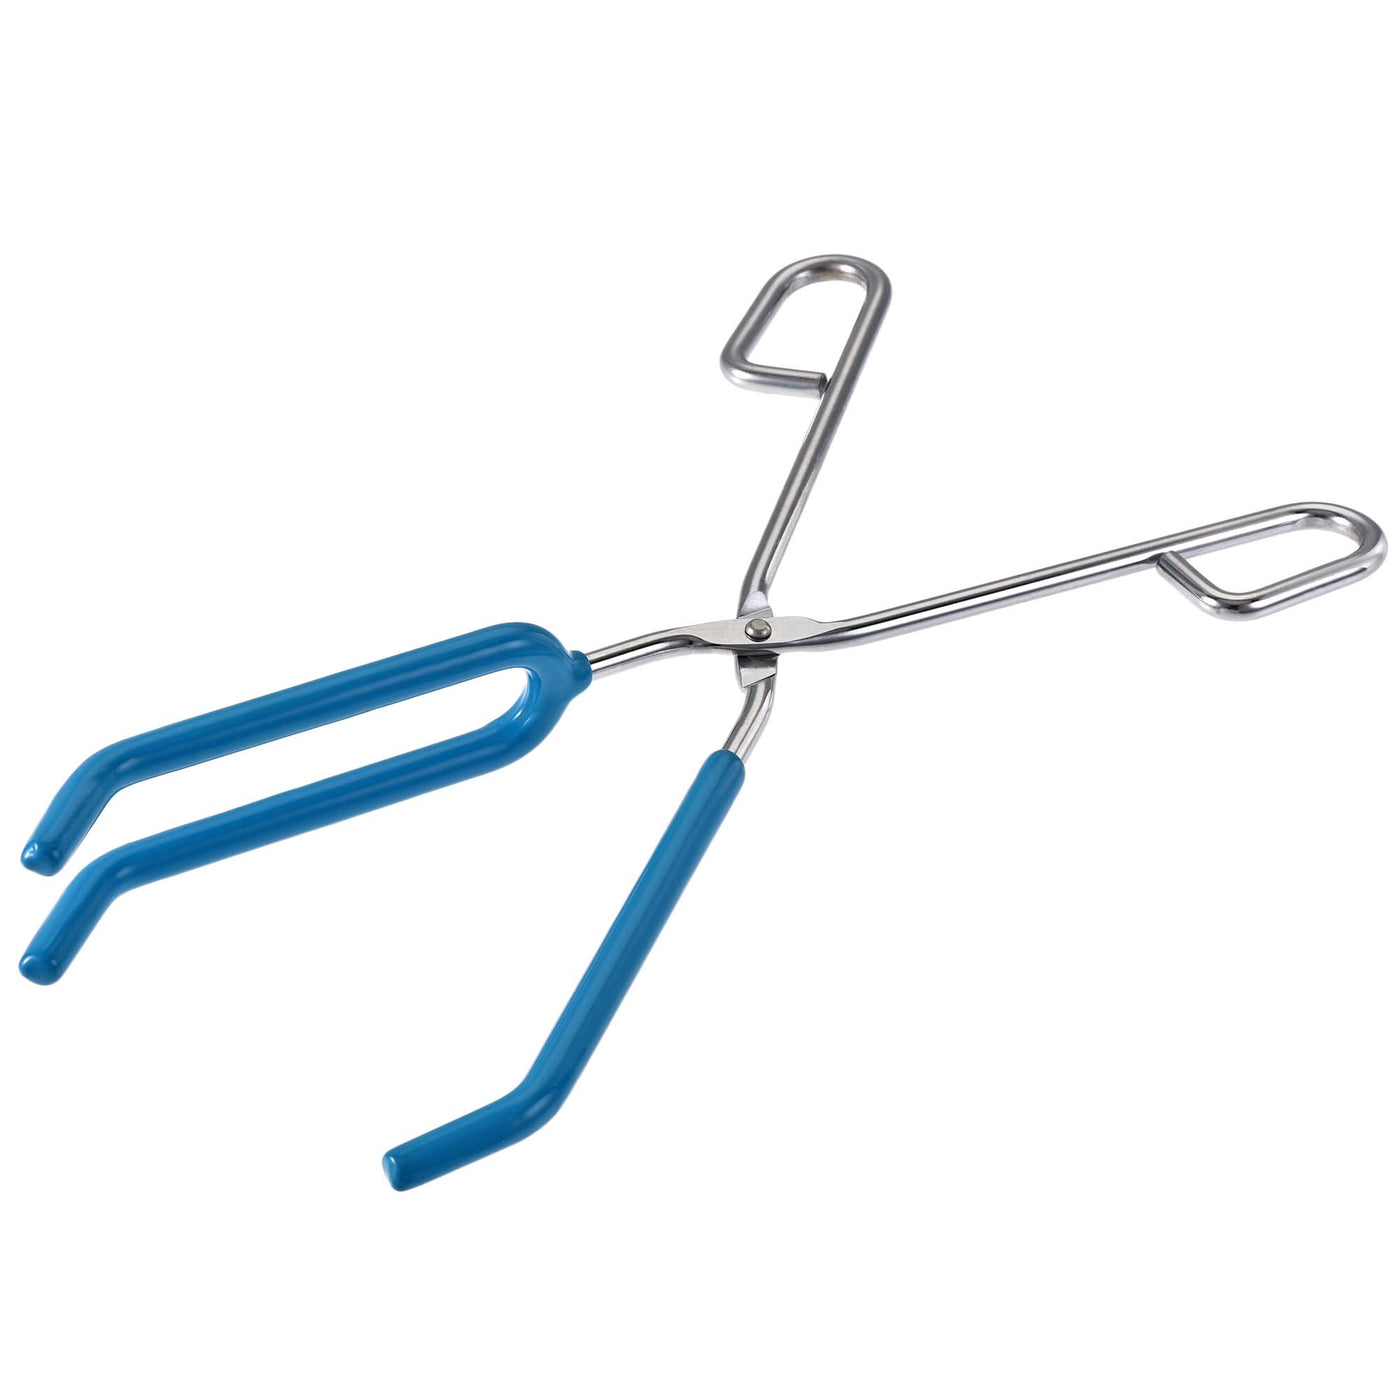 uxcell Uxcell Lab Beaker Tongs 3 Prongs Stainless Steel 11.81-inch Opens Up to 180mm Width Blue